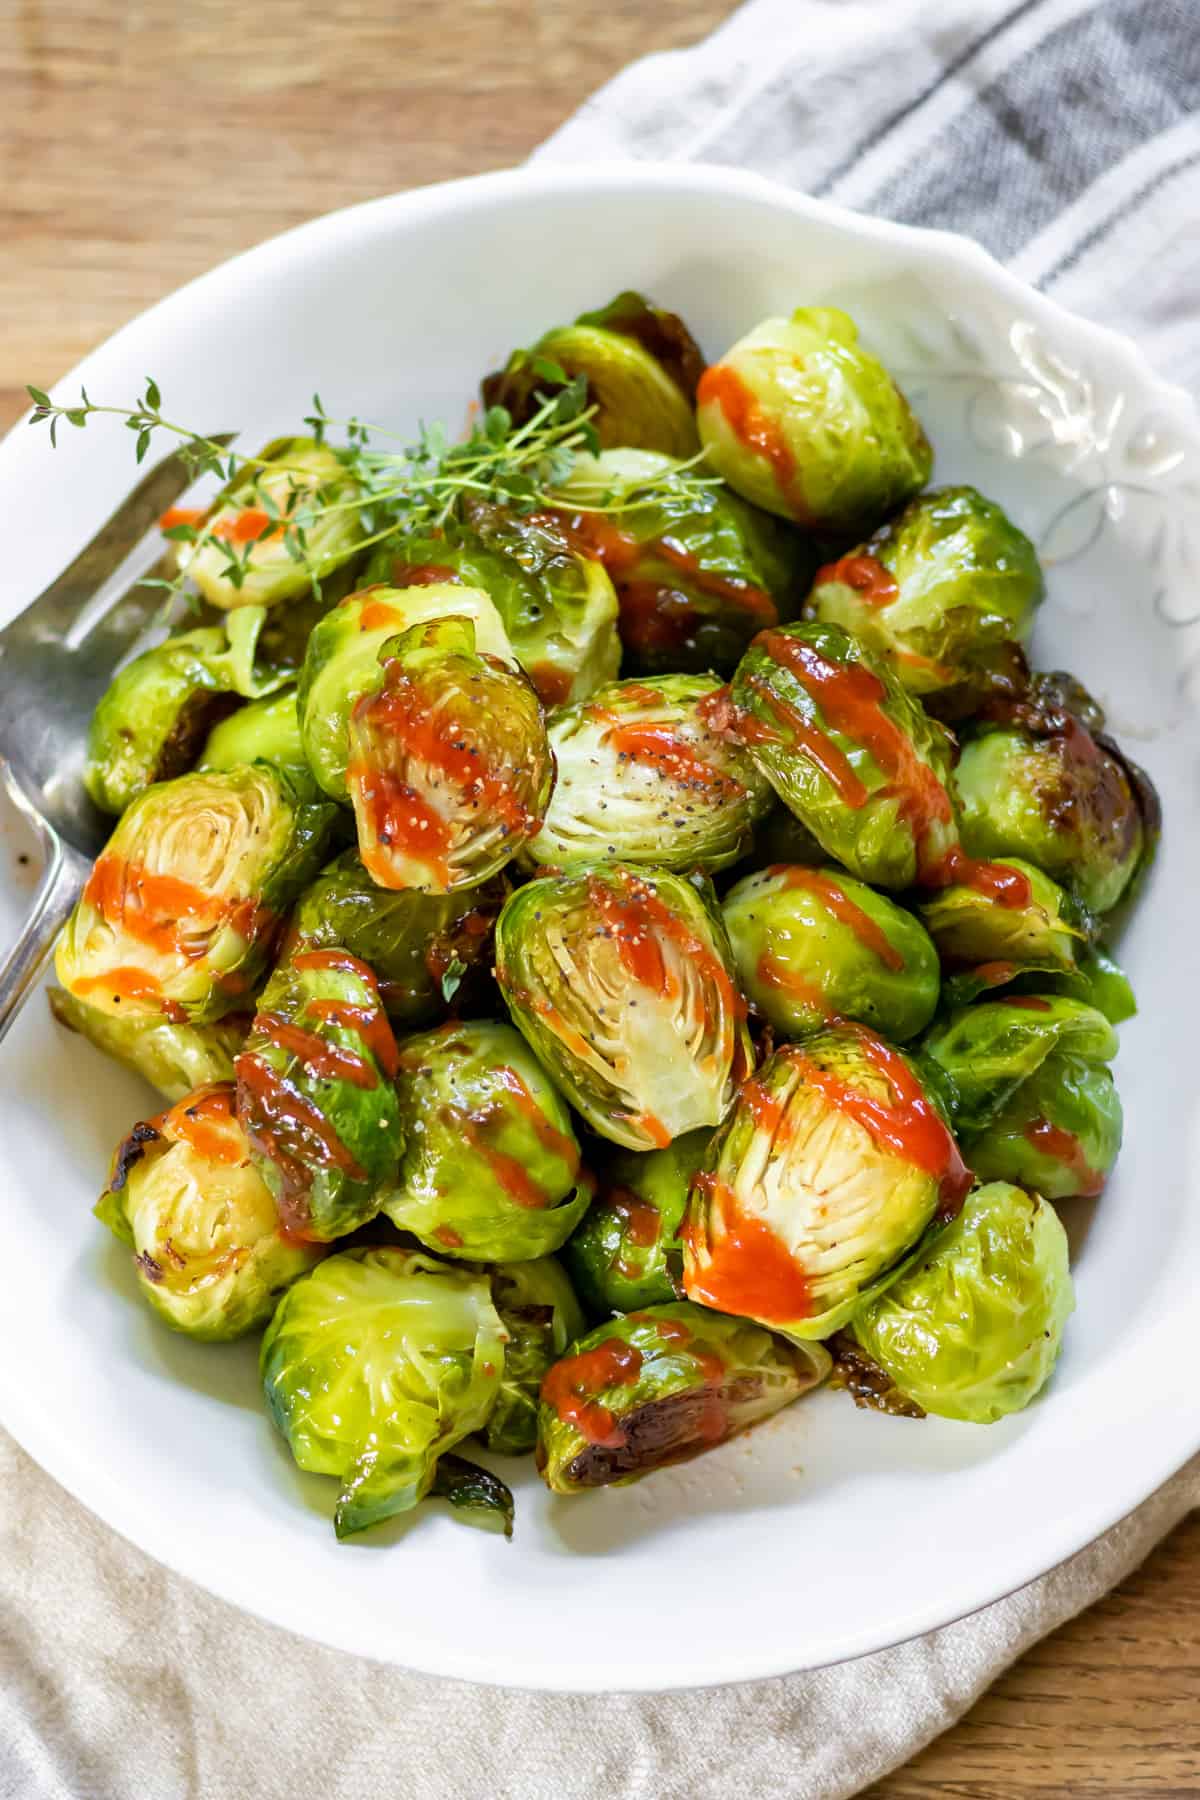 Plate of roasted brussels sprouts with honey sriracha glaze.